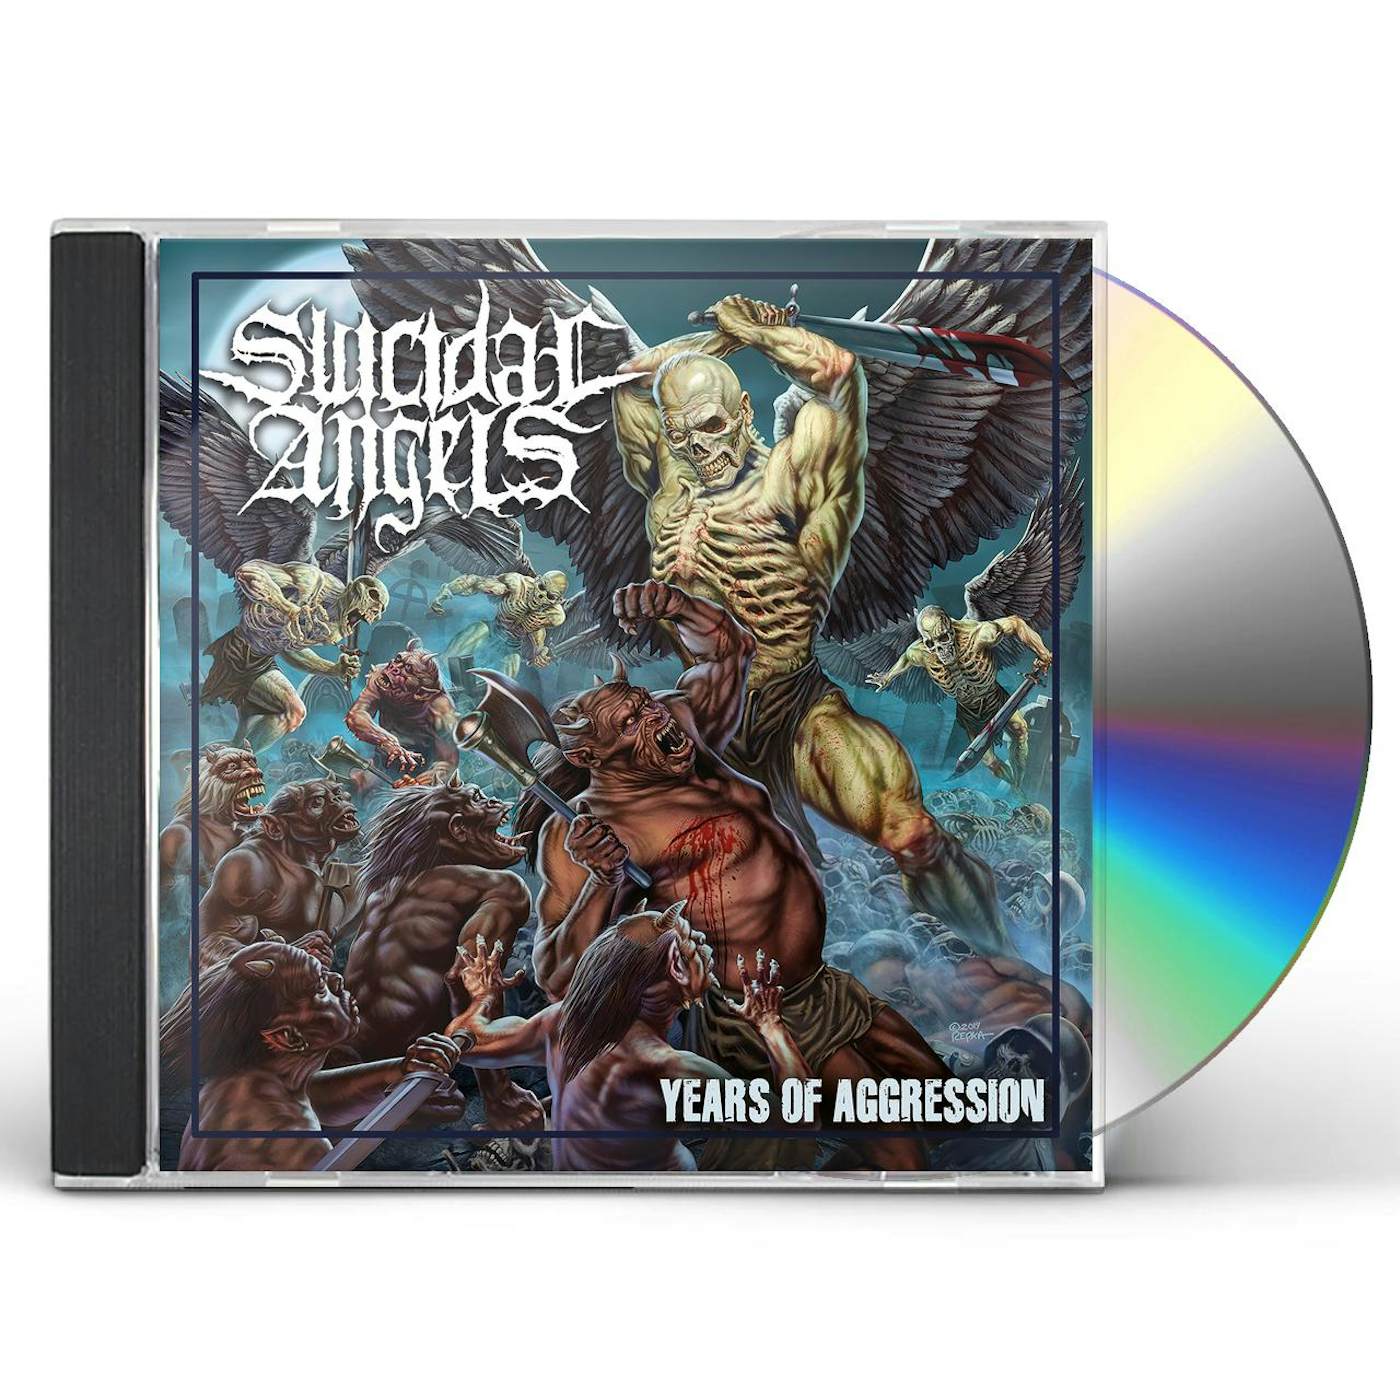 Suicidal Angels YEARS OF AGGRESSION CD